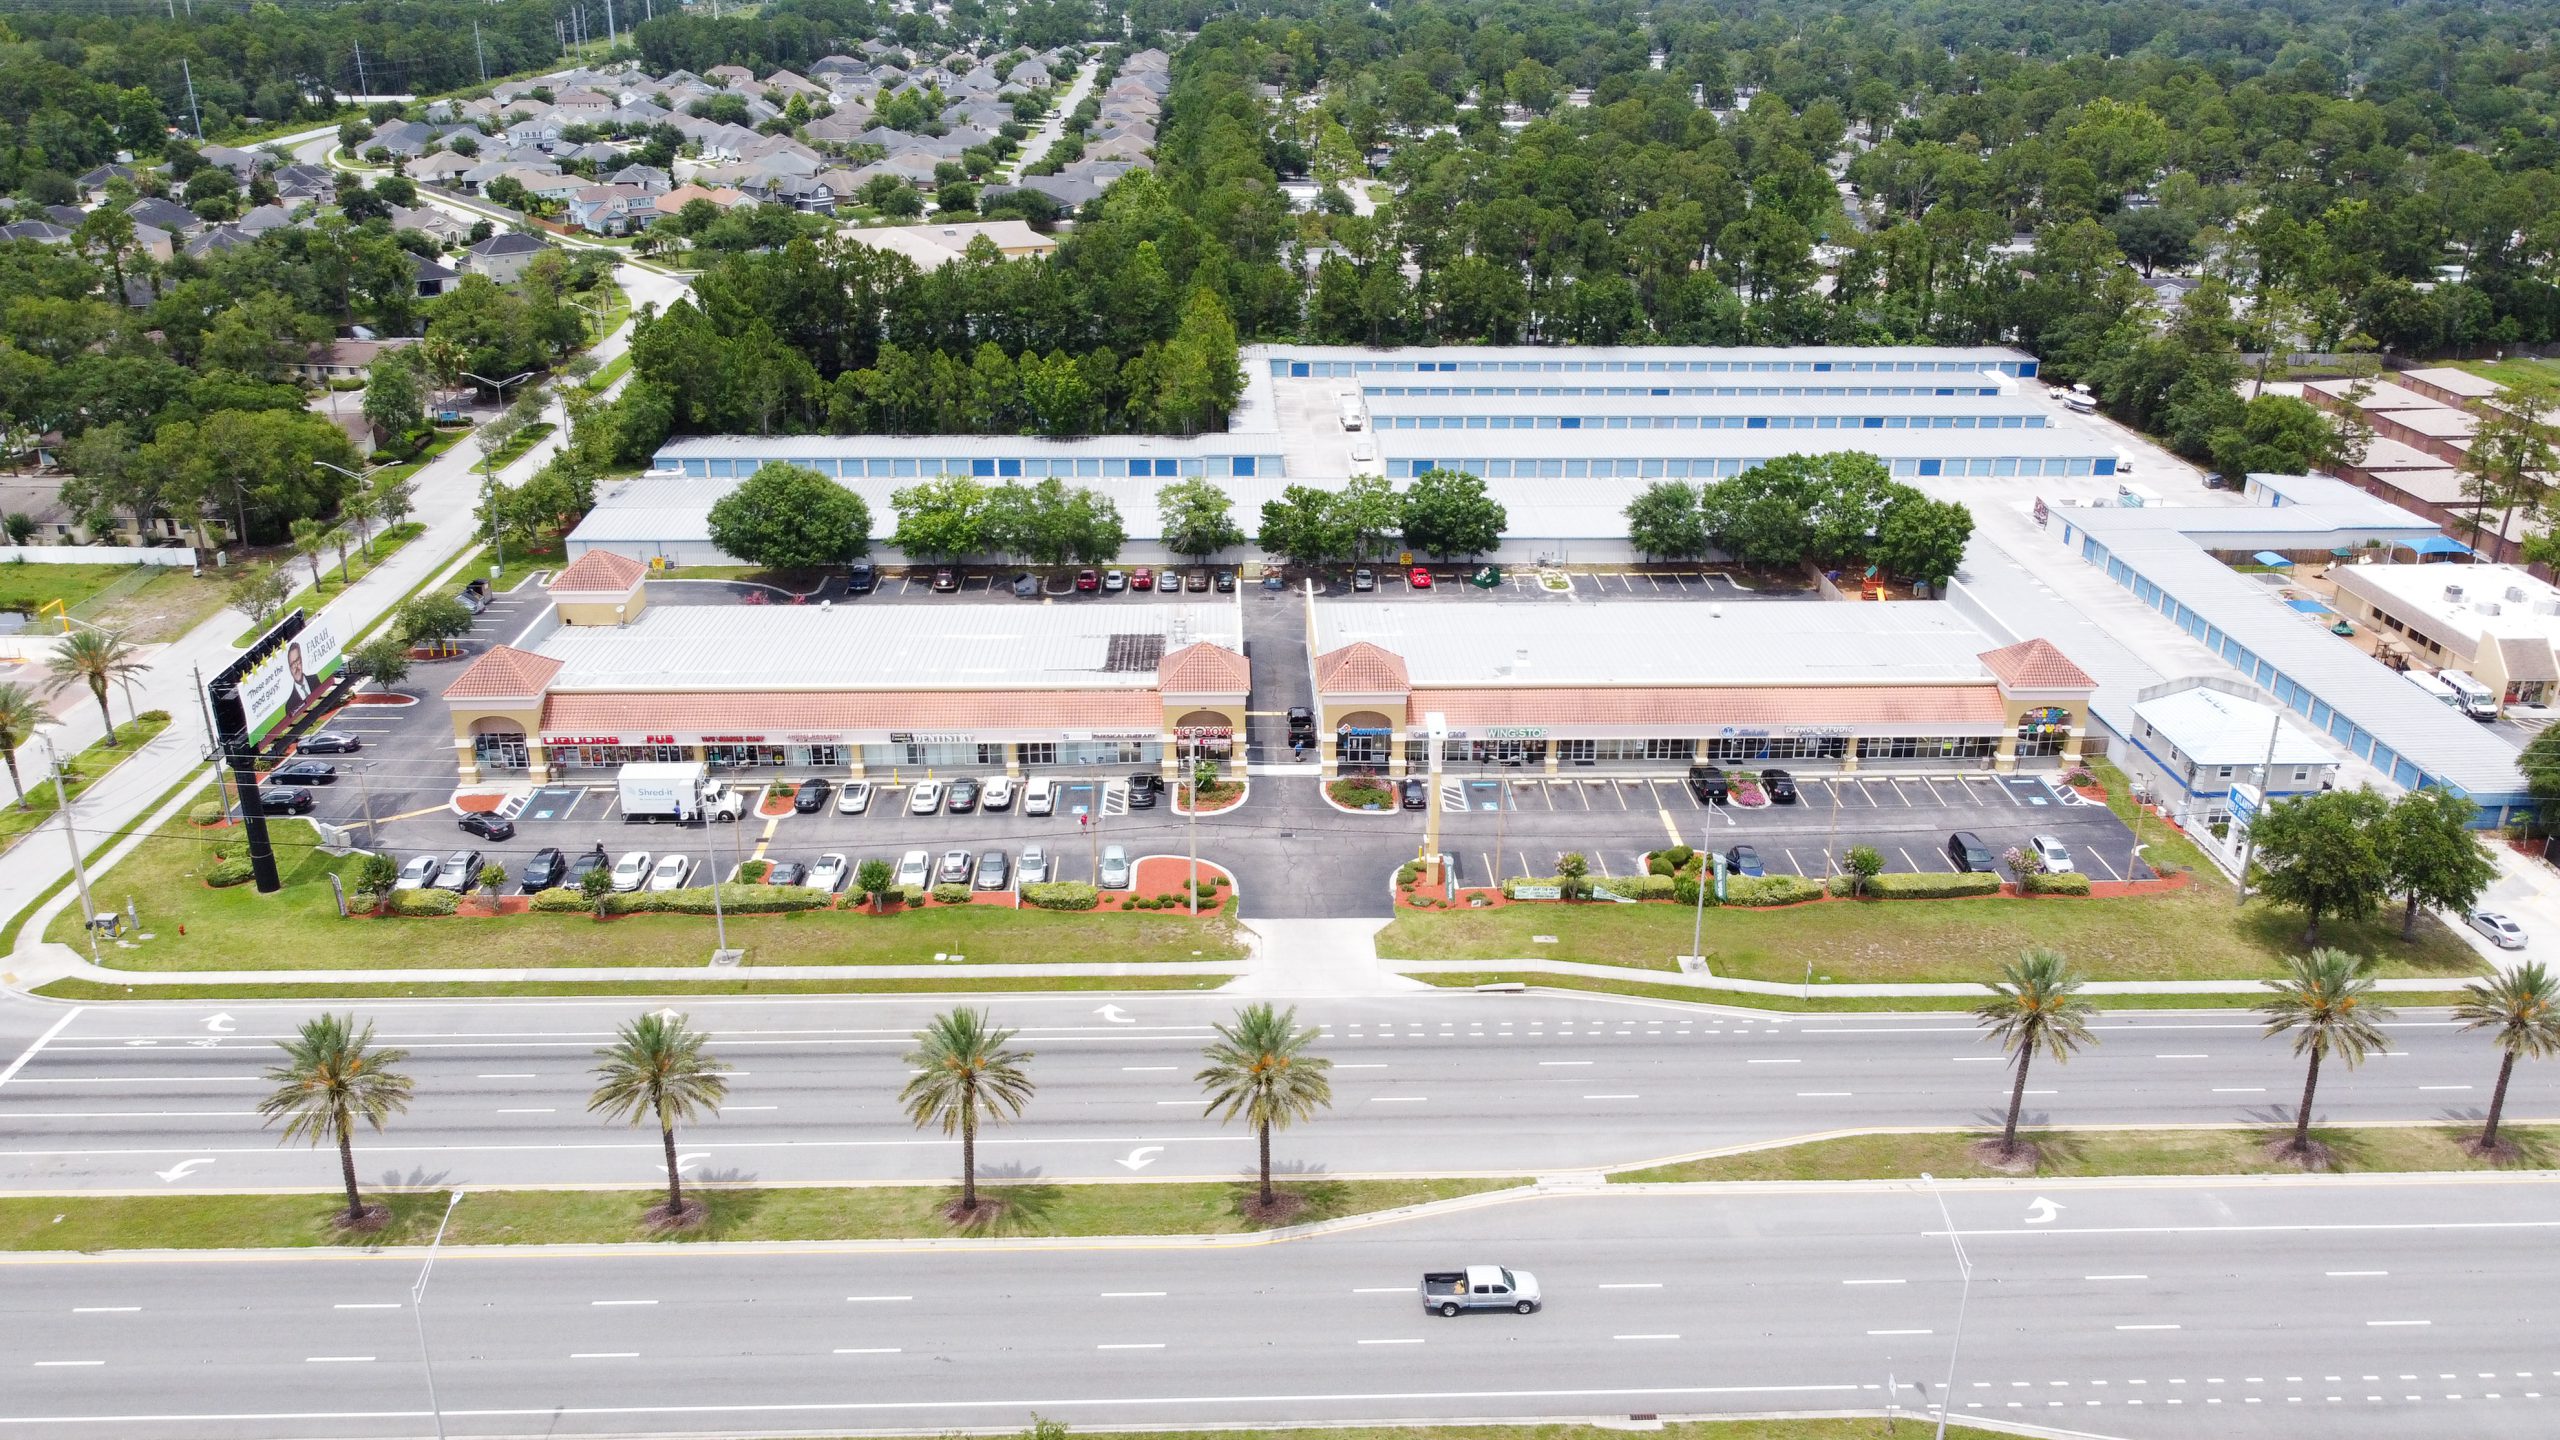 An aerial view of a one story retail center and road.